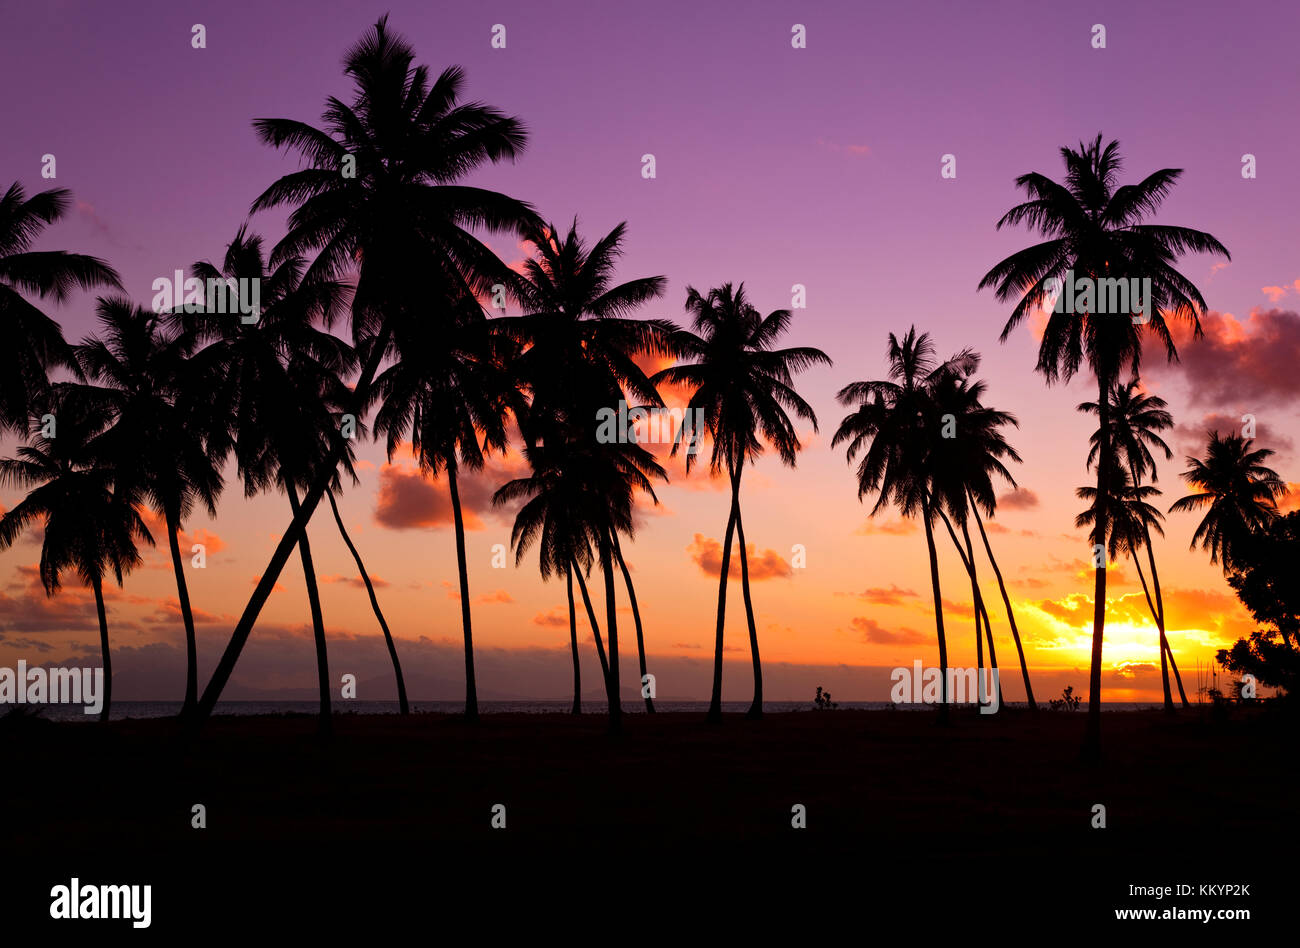 Lots of coconut palm trees at an Antiguan beach, a beautiful sunset as background. The island on the horizon is Montserrat. Stock Photo